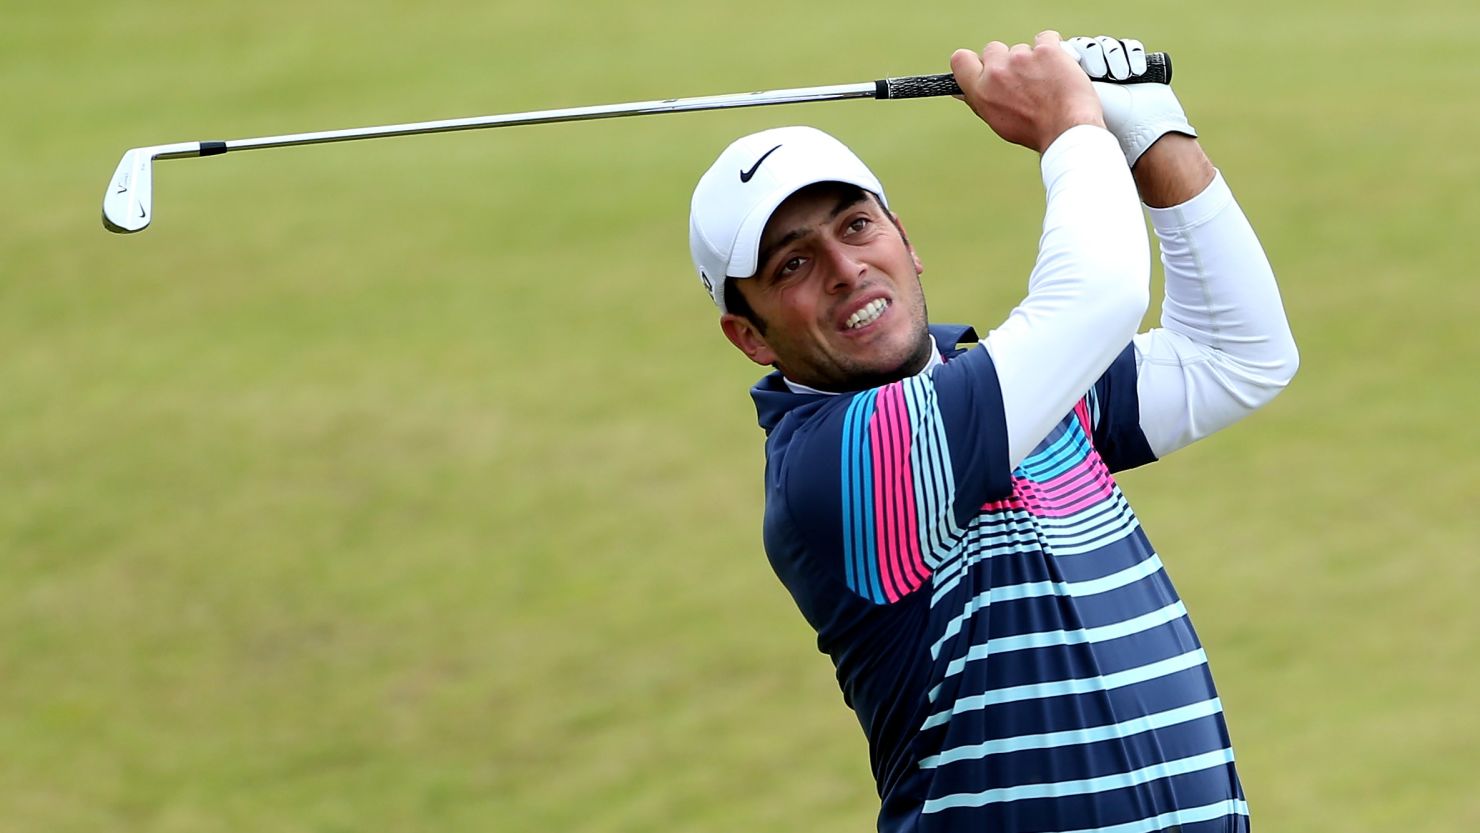 Francesco Molinari recorded the best ever round at the Inverness links